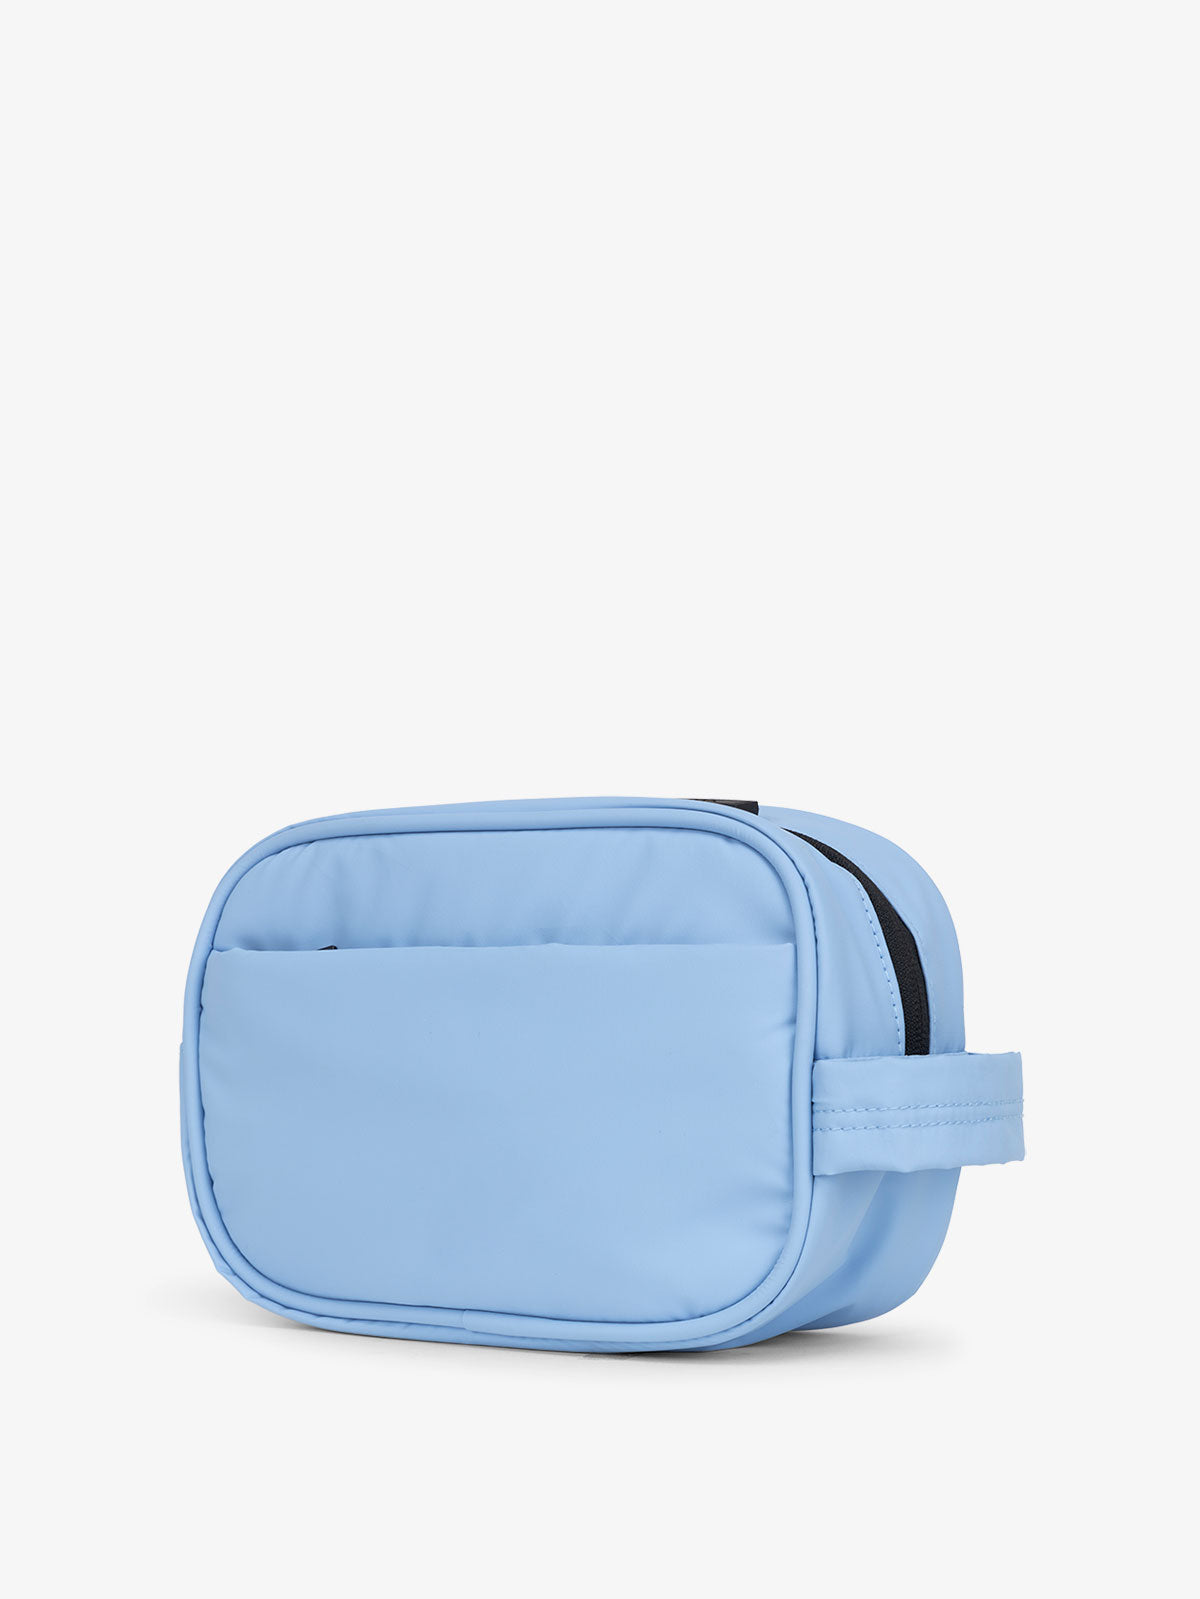 CALPAK Luka Toiletry Bag for travel organization with soft puffy exterior and multiple pockets in light blue